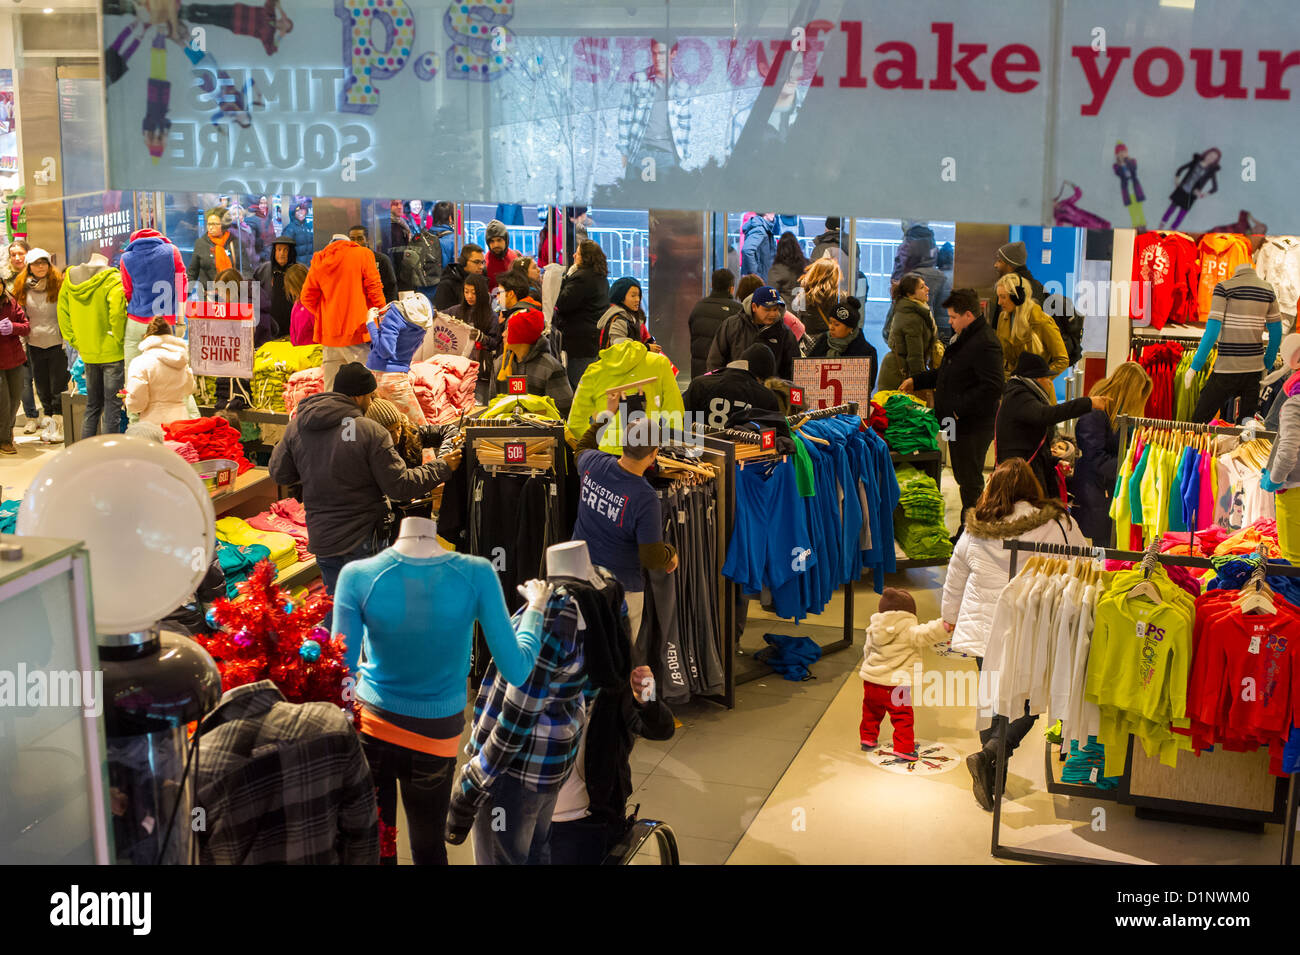 https://c8.alamy.com/comp/D1NWM0/shoppers-and-workers-in-the-aeropostale-clothing-store-in-times-square-D1NWM0.jpg